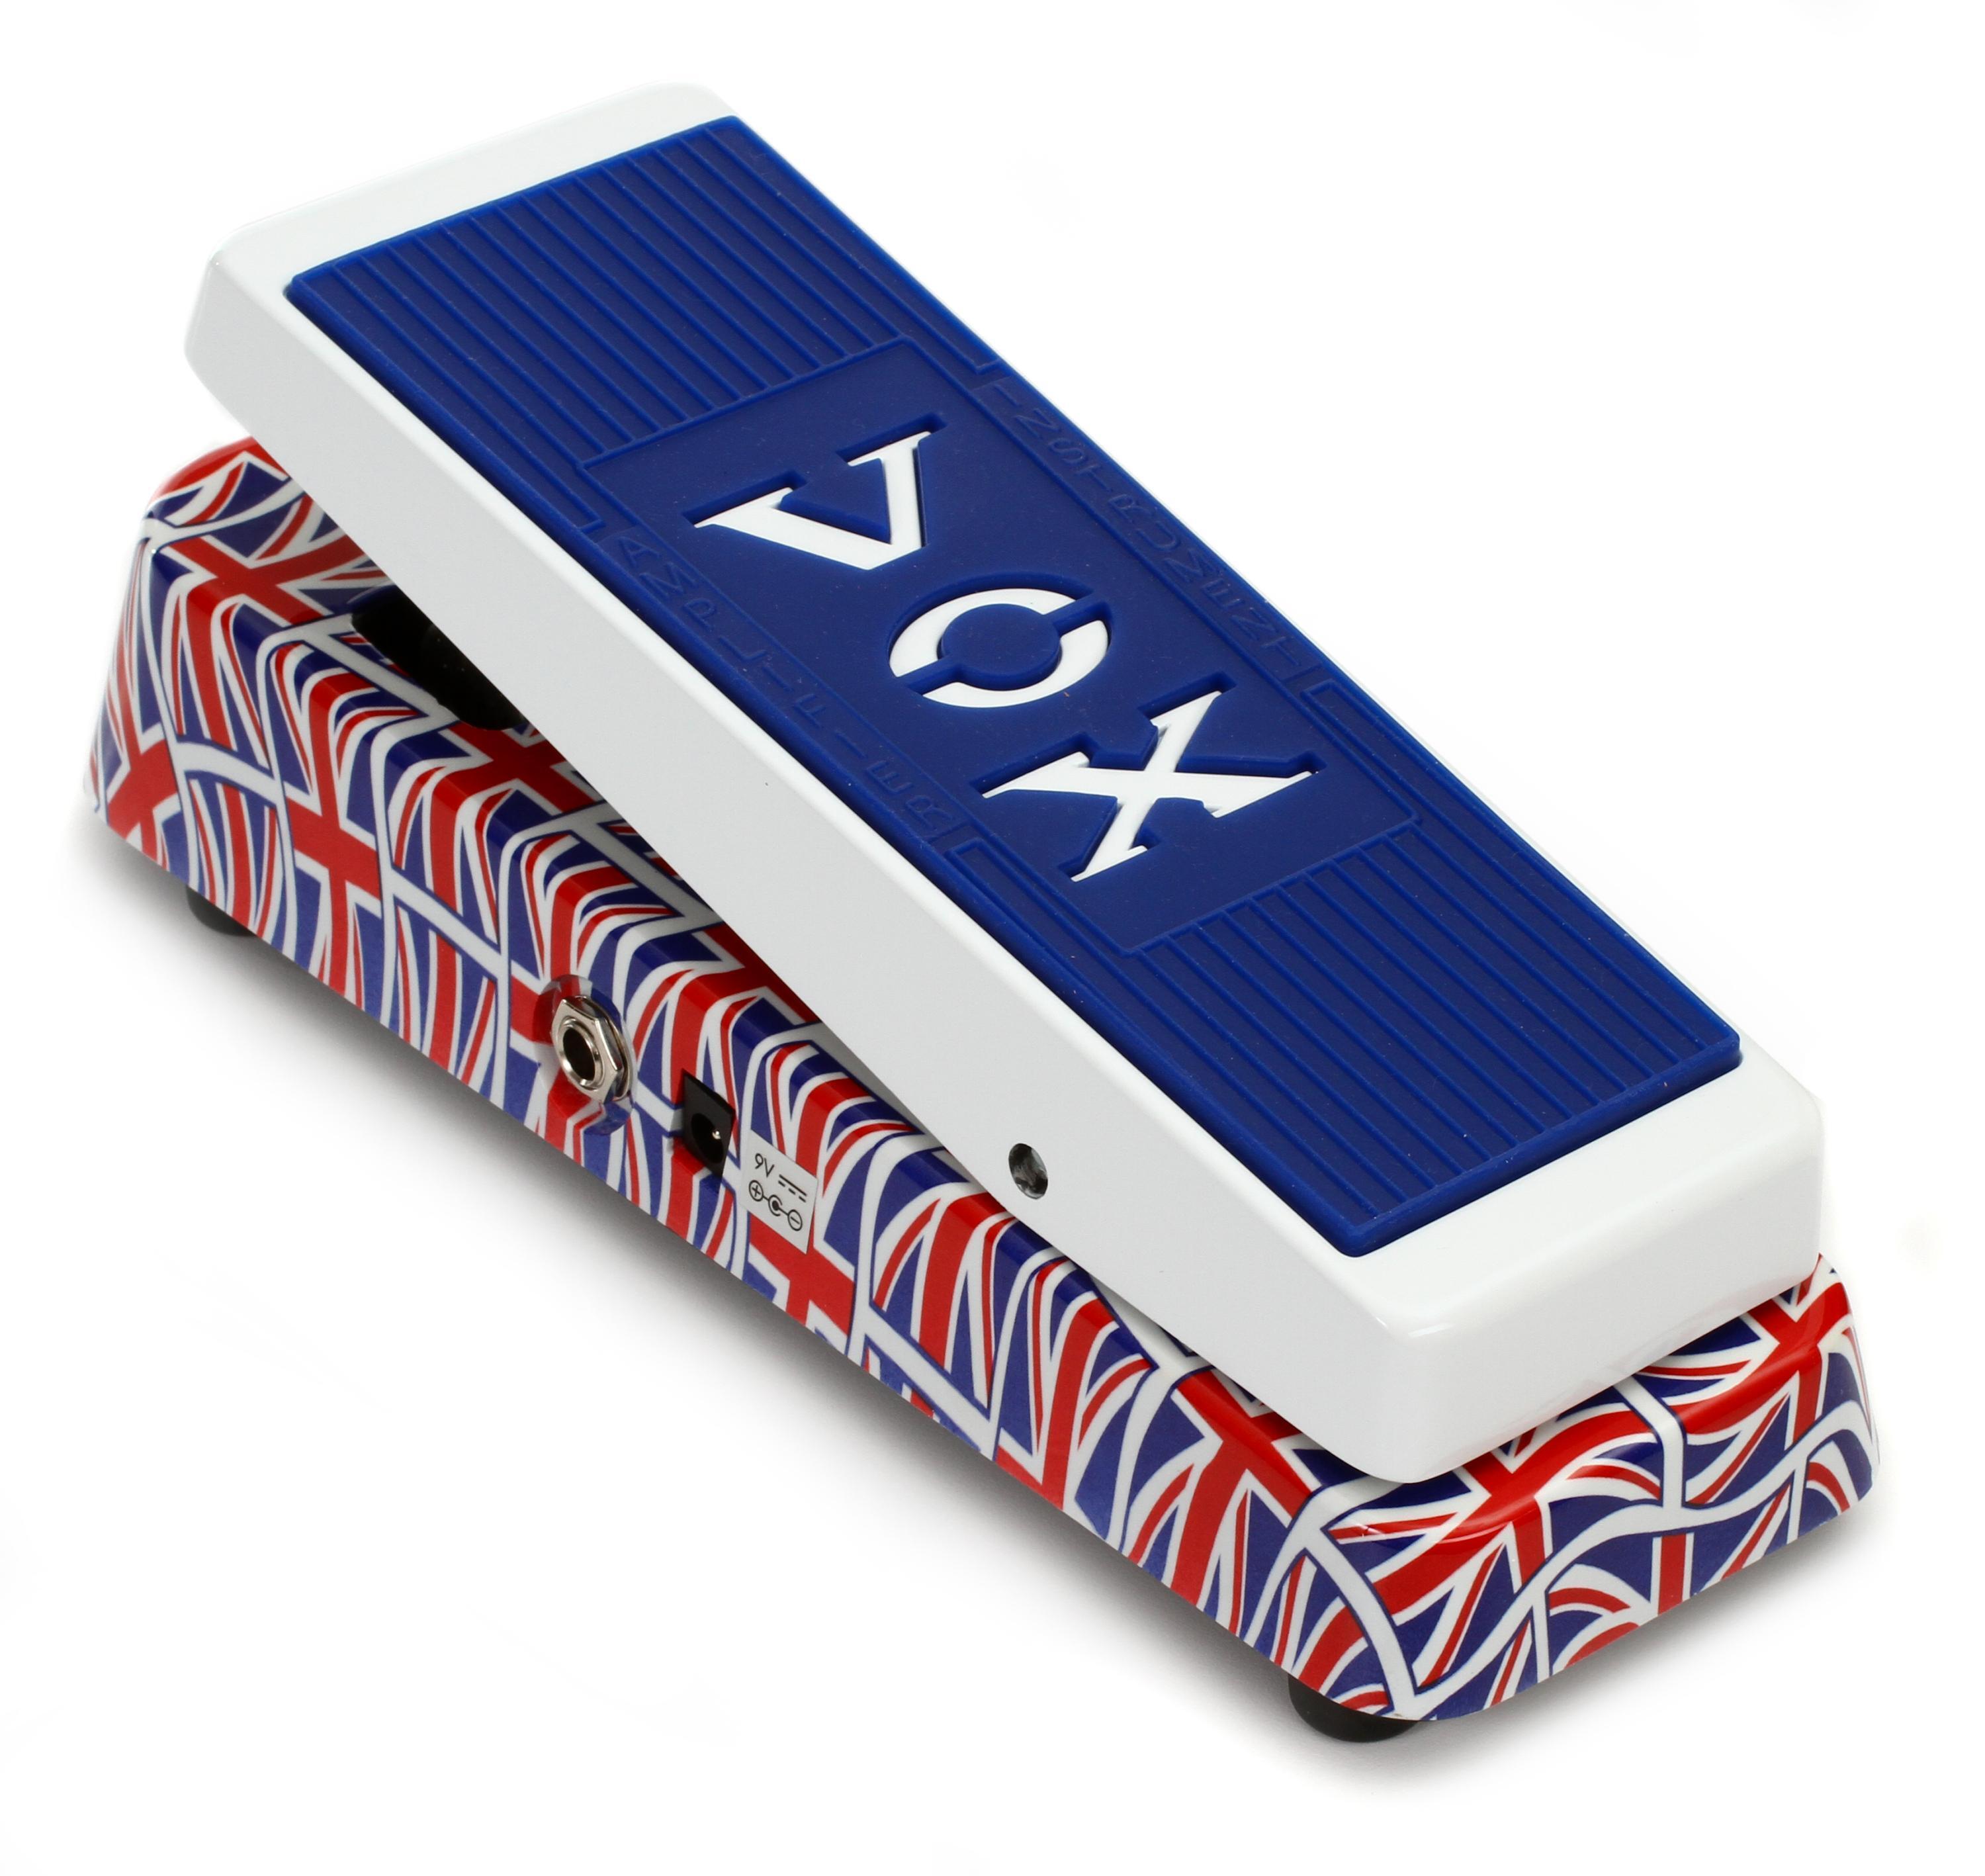 Vox V847-AUJ Classic Reissue Wah Pedal - Union Jack | Sweetwater